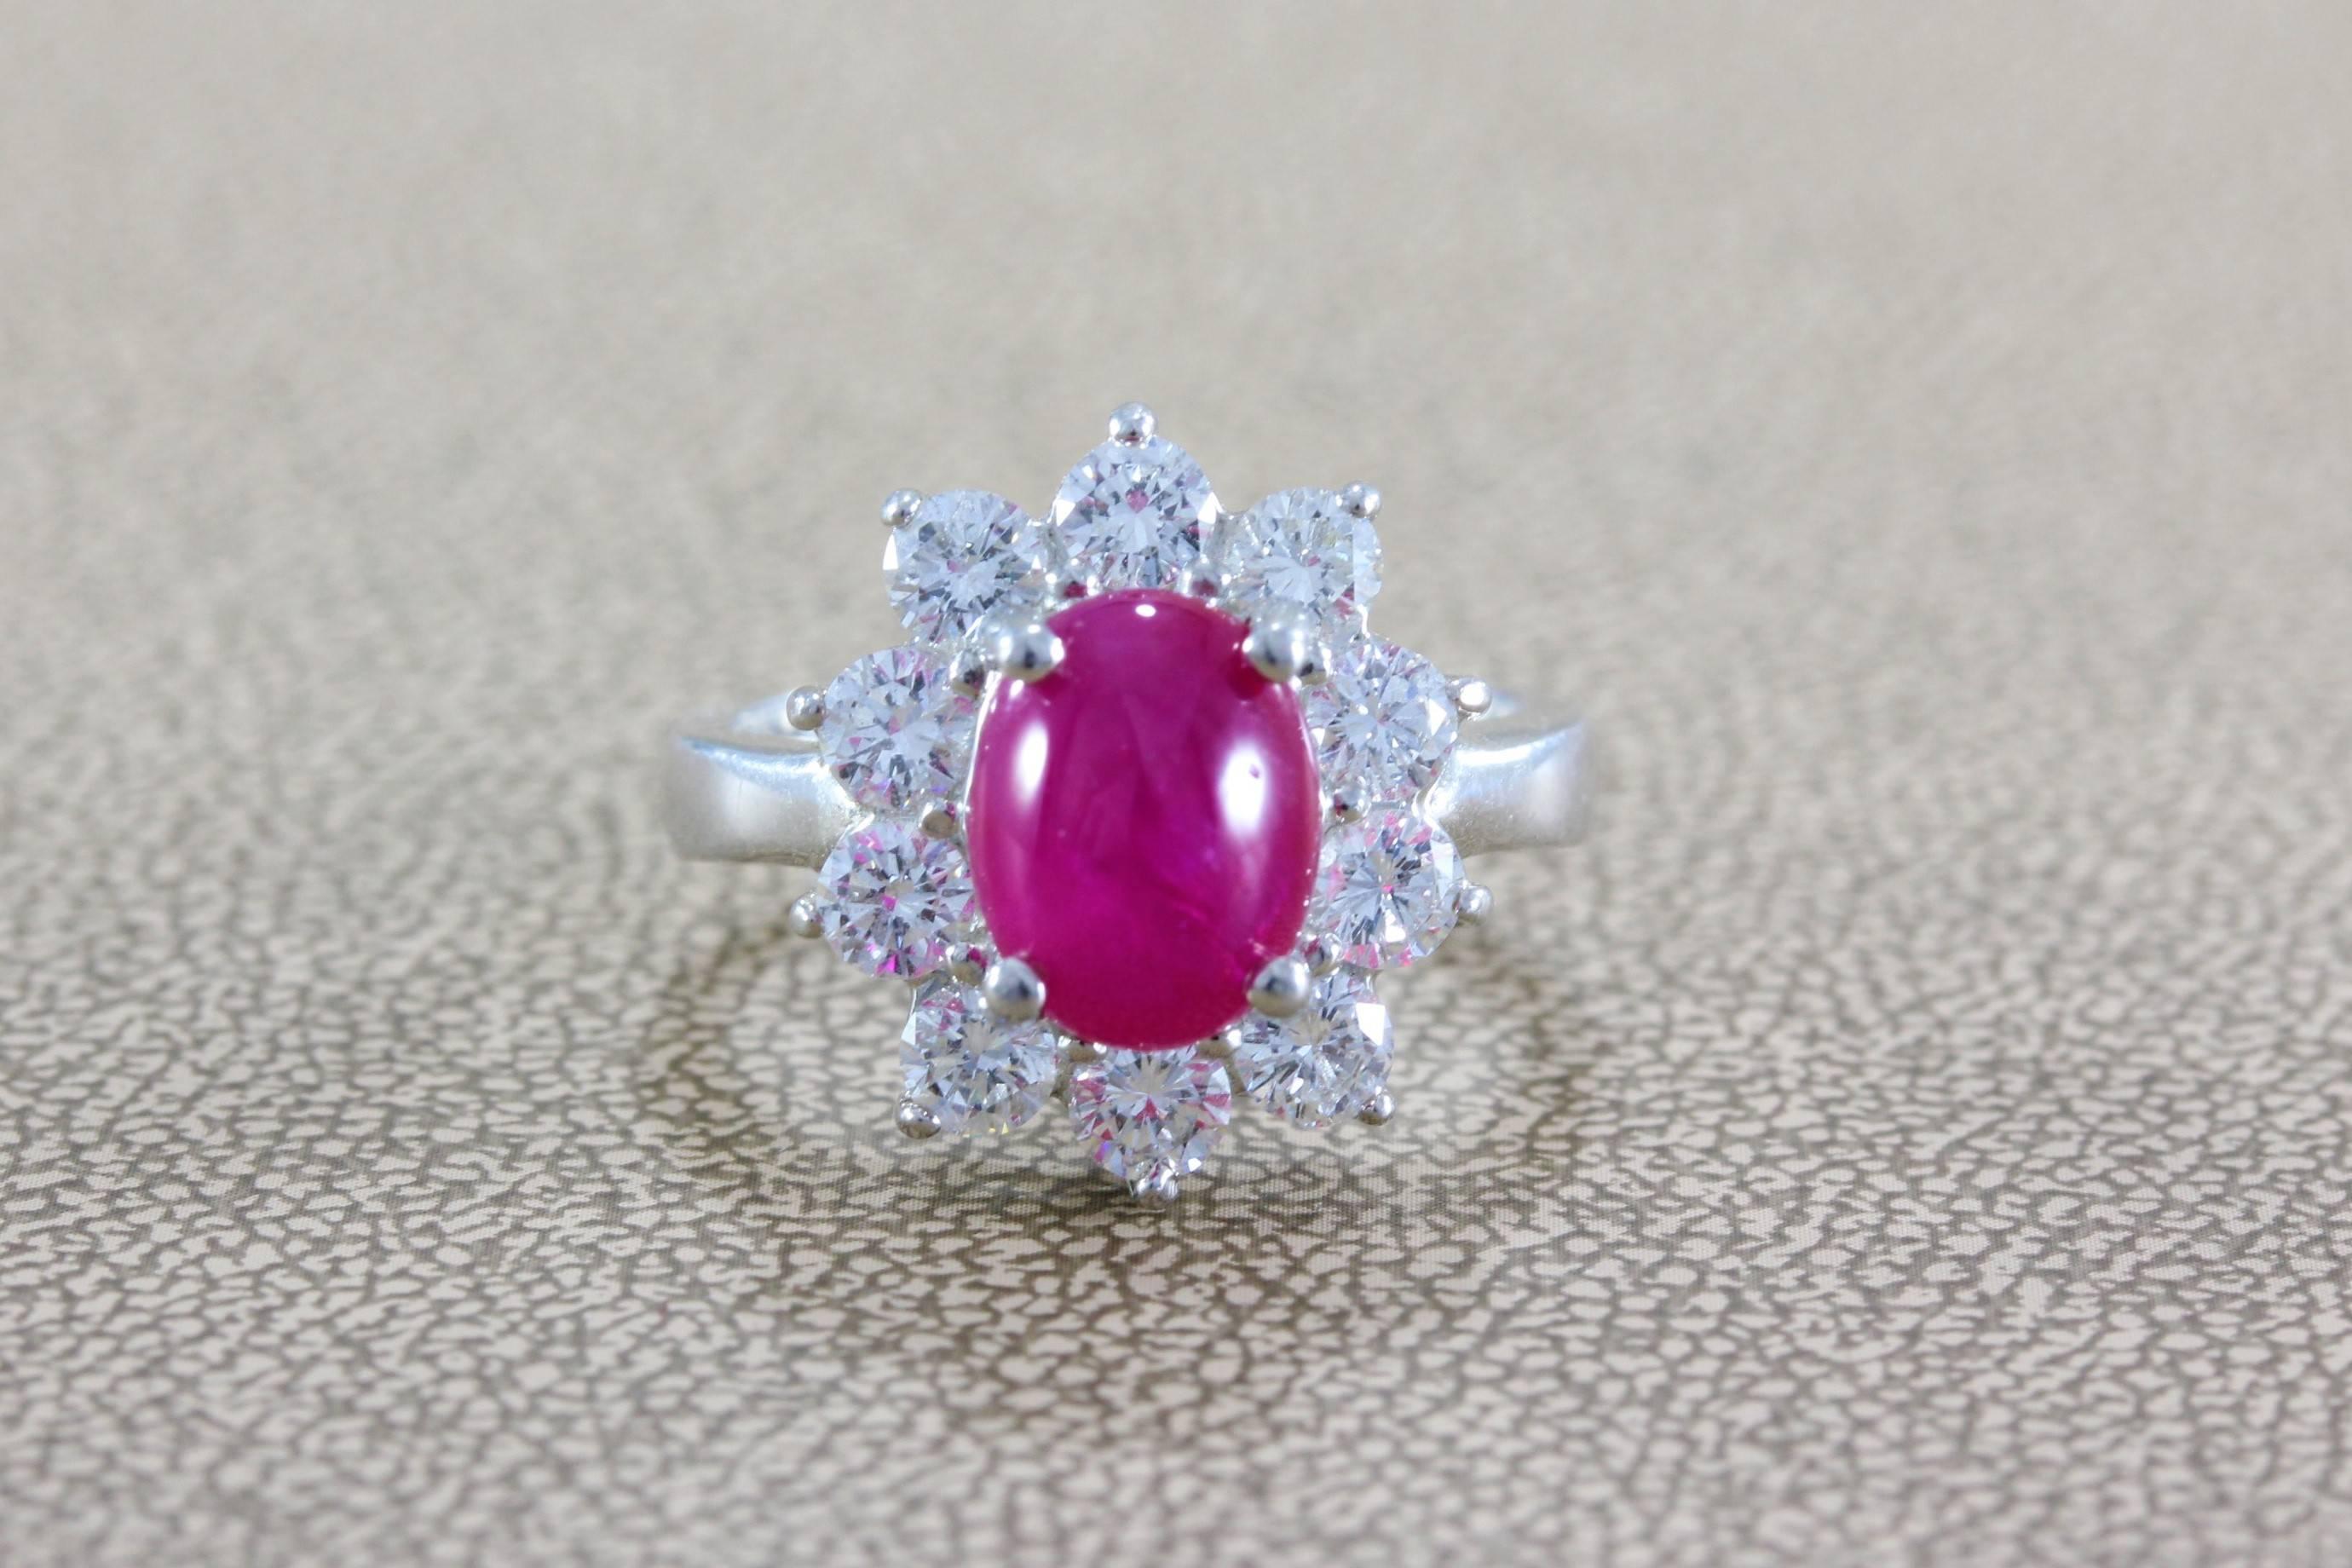 A breathtaking ring featuring a GIA certified 3.00 carat cabochon Burma ruby surrounded by 1.00 carat of dazzling round cut diamonds in a platinum setting. Since the start of recorder time Burma (Myanmar) has been the source of the fines quality